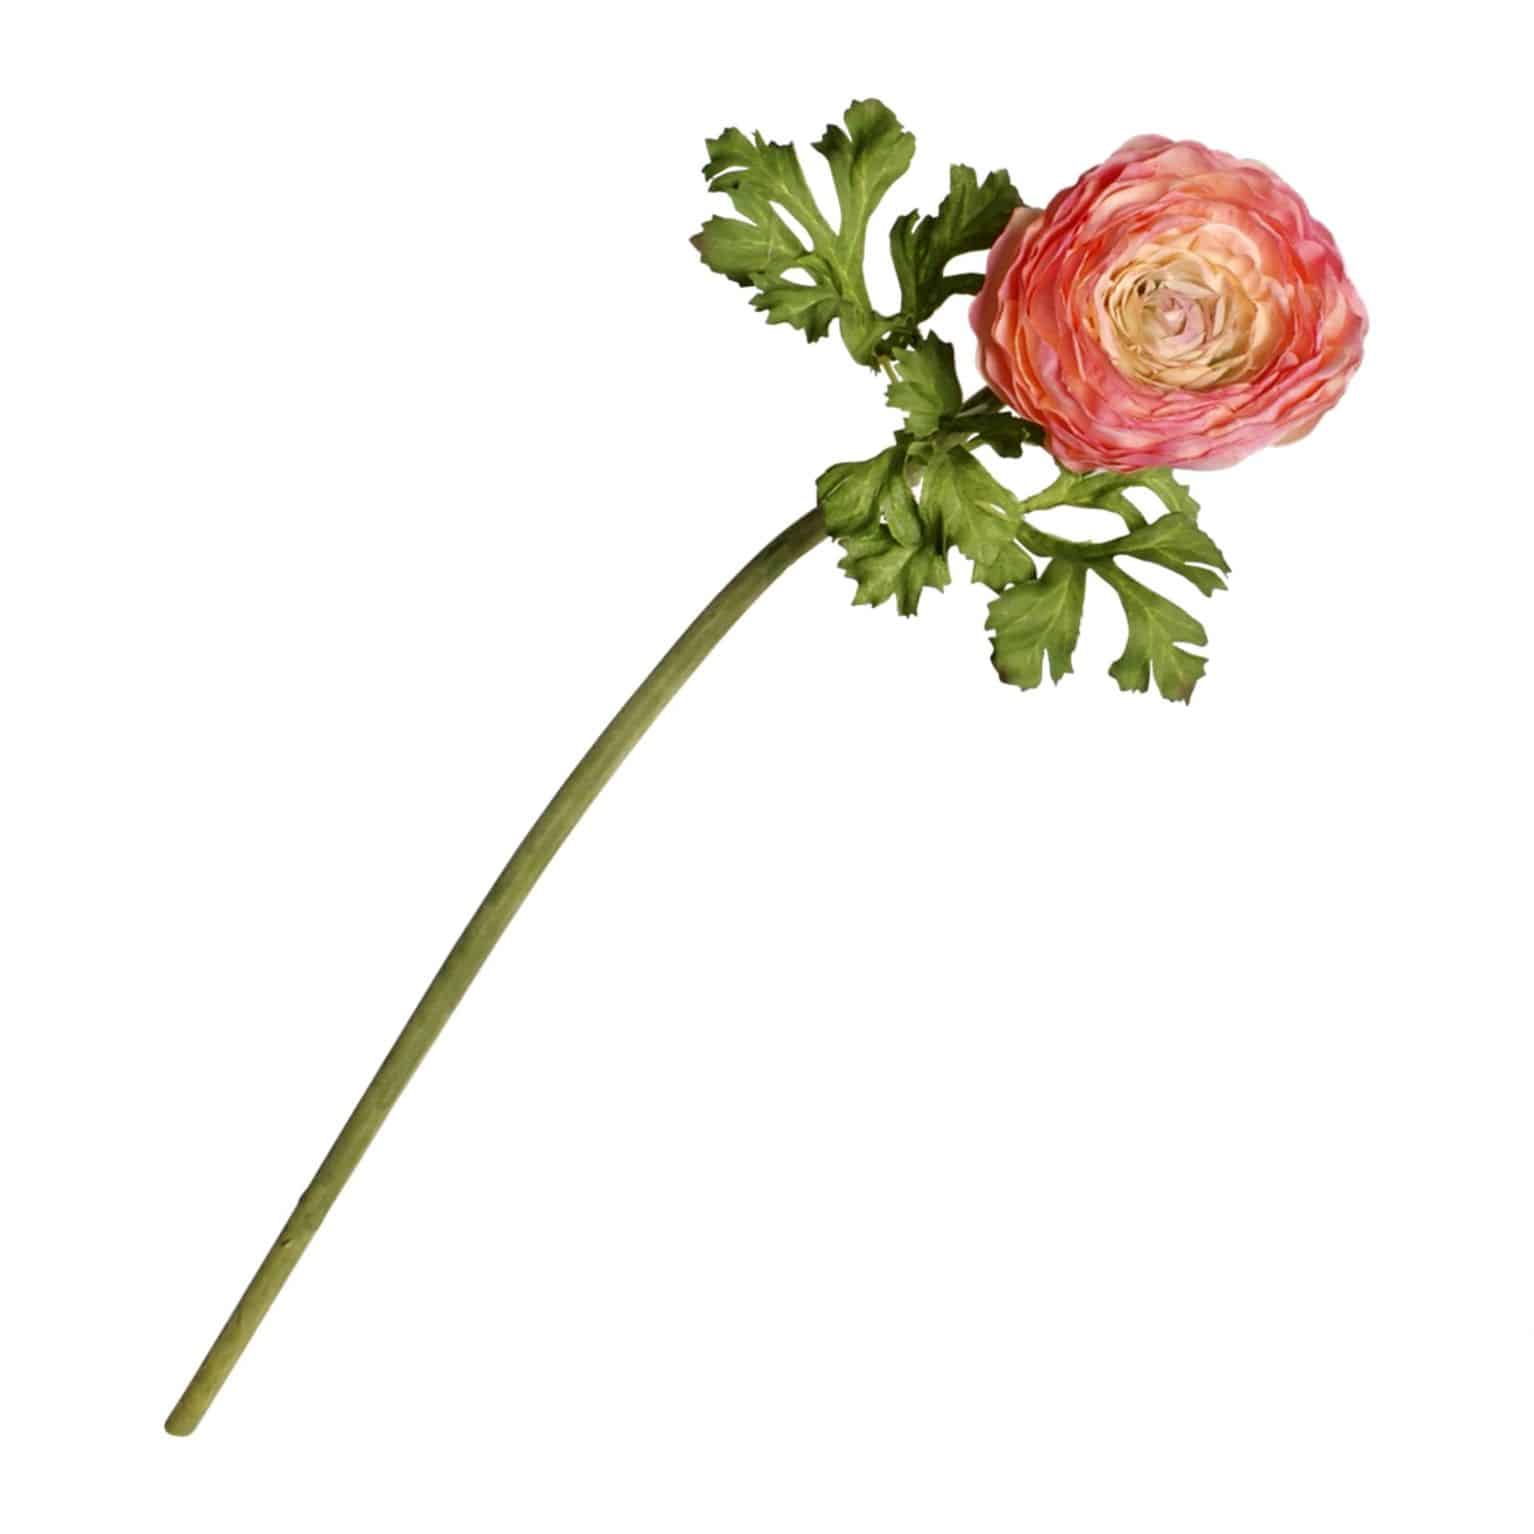 Fully bloomed ranunculus silk flower is wonderfully designed to show this flower at its finest. Pink to peach colour is superbly lifelike with natural tones.